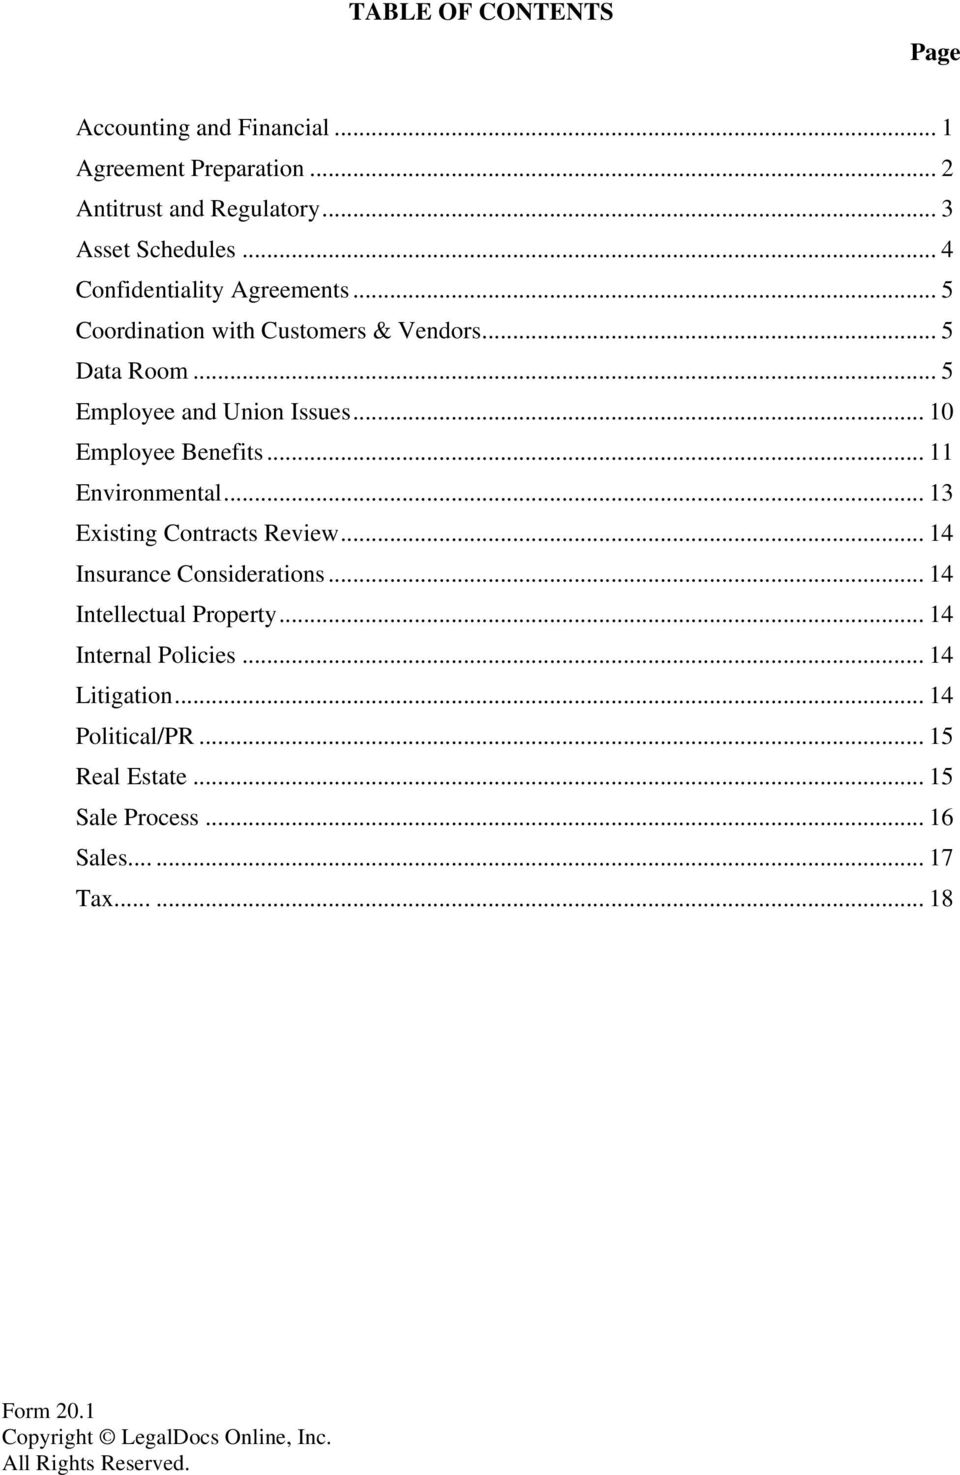 Due Diligence Checklist For Acquisition Of A Private Company Pdf Free Download